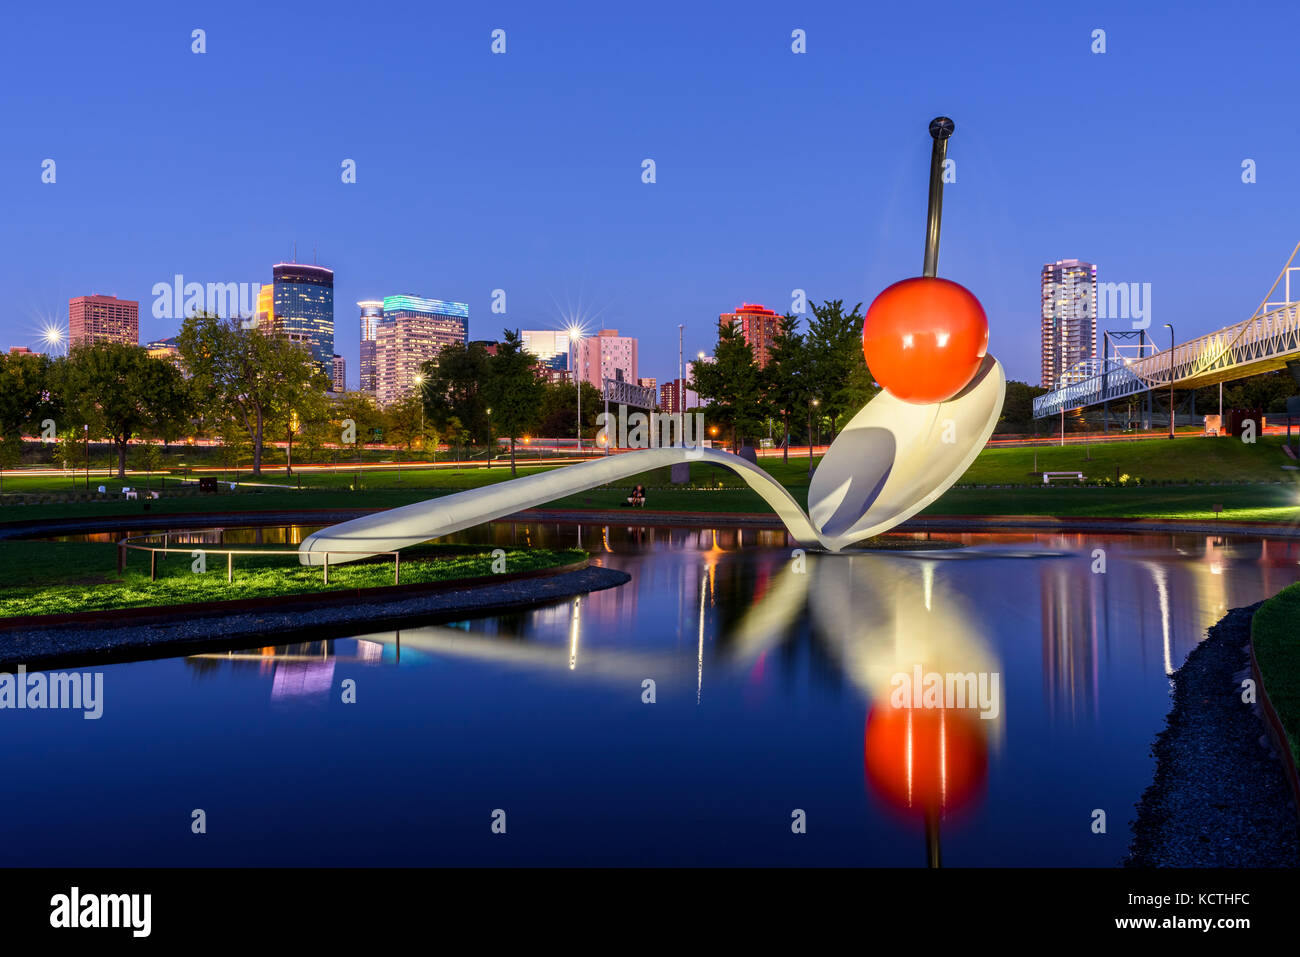 Spoonbridge and Cherry sculpture in front of Minneapolis skyline at nightt. Designed by Claes Oldenburg and his wife, Coosje van Bruggen. The complex  Stock Photo